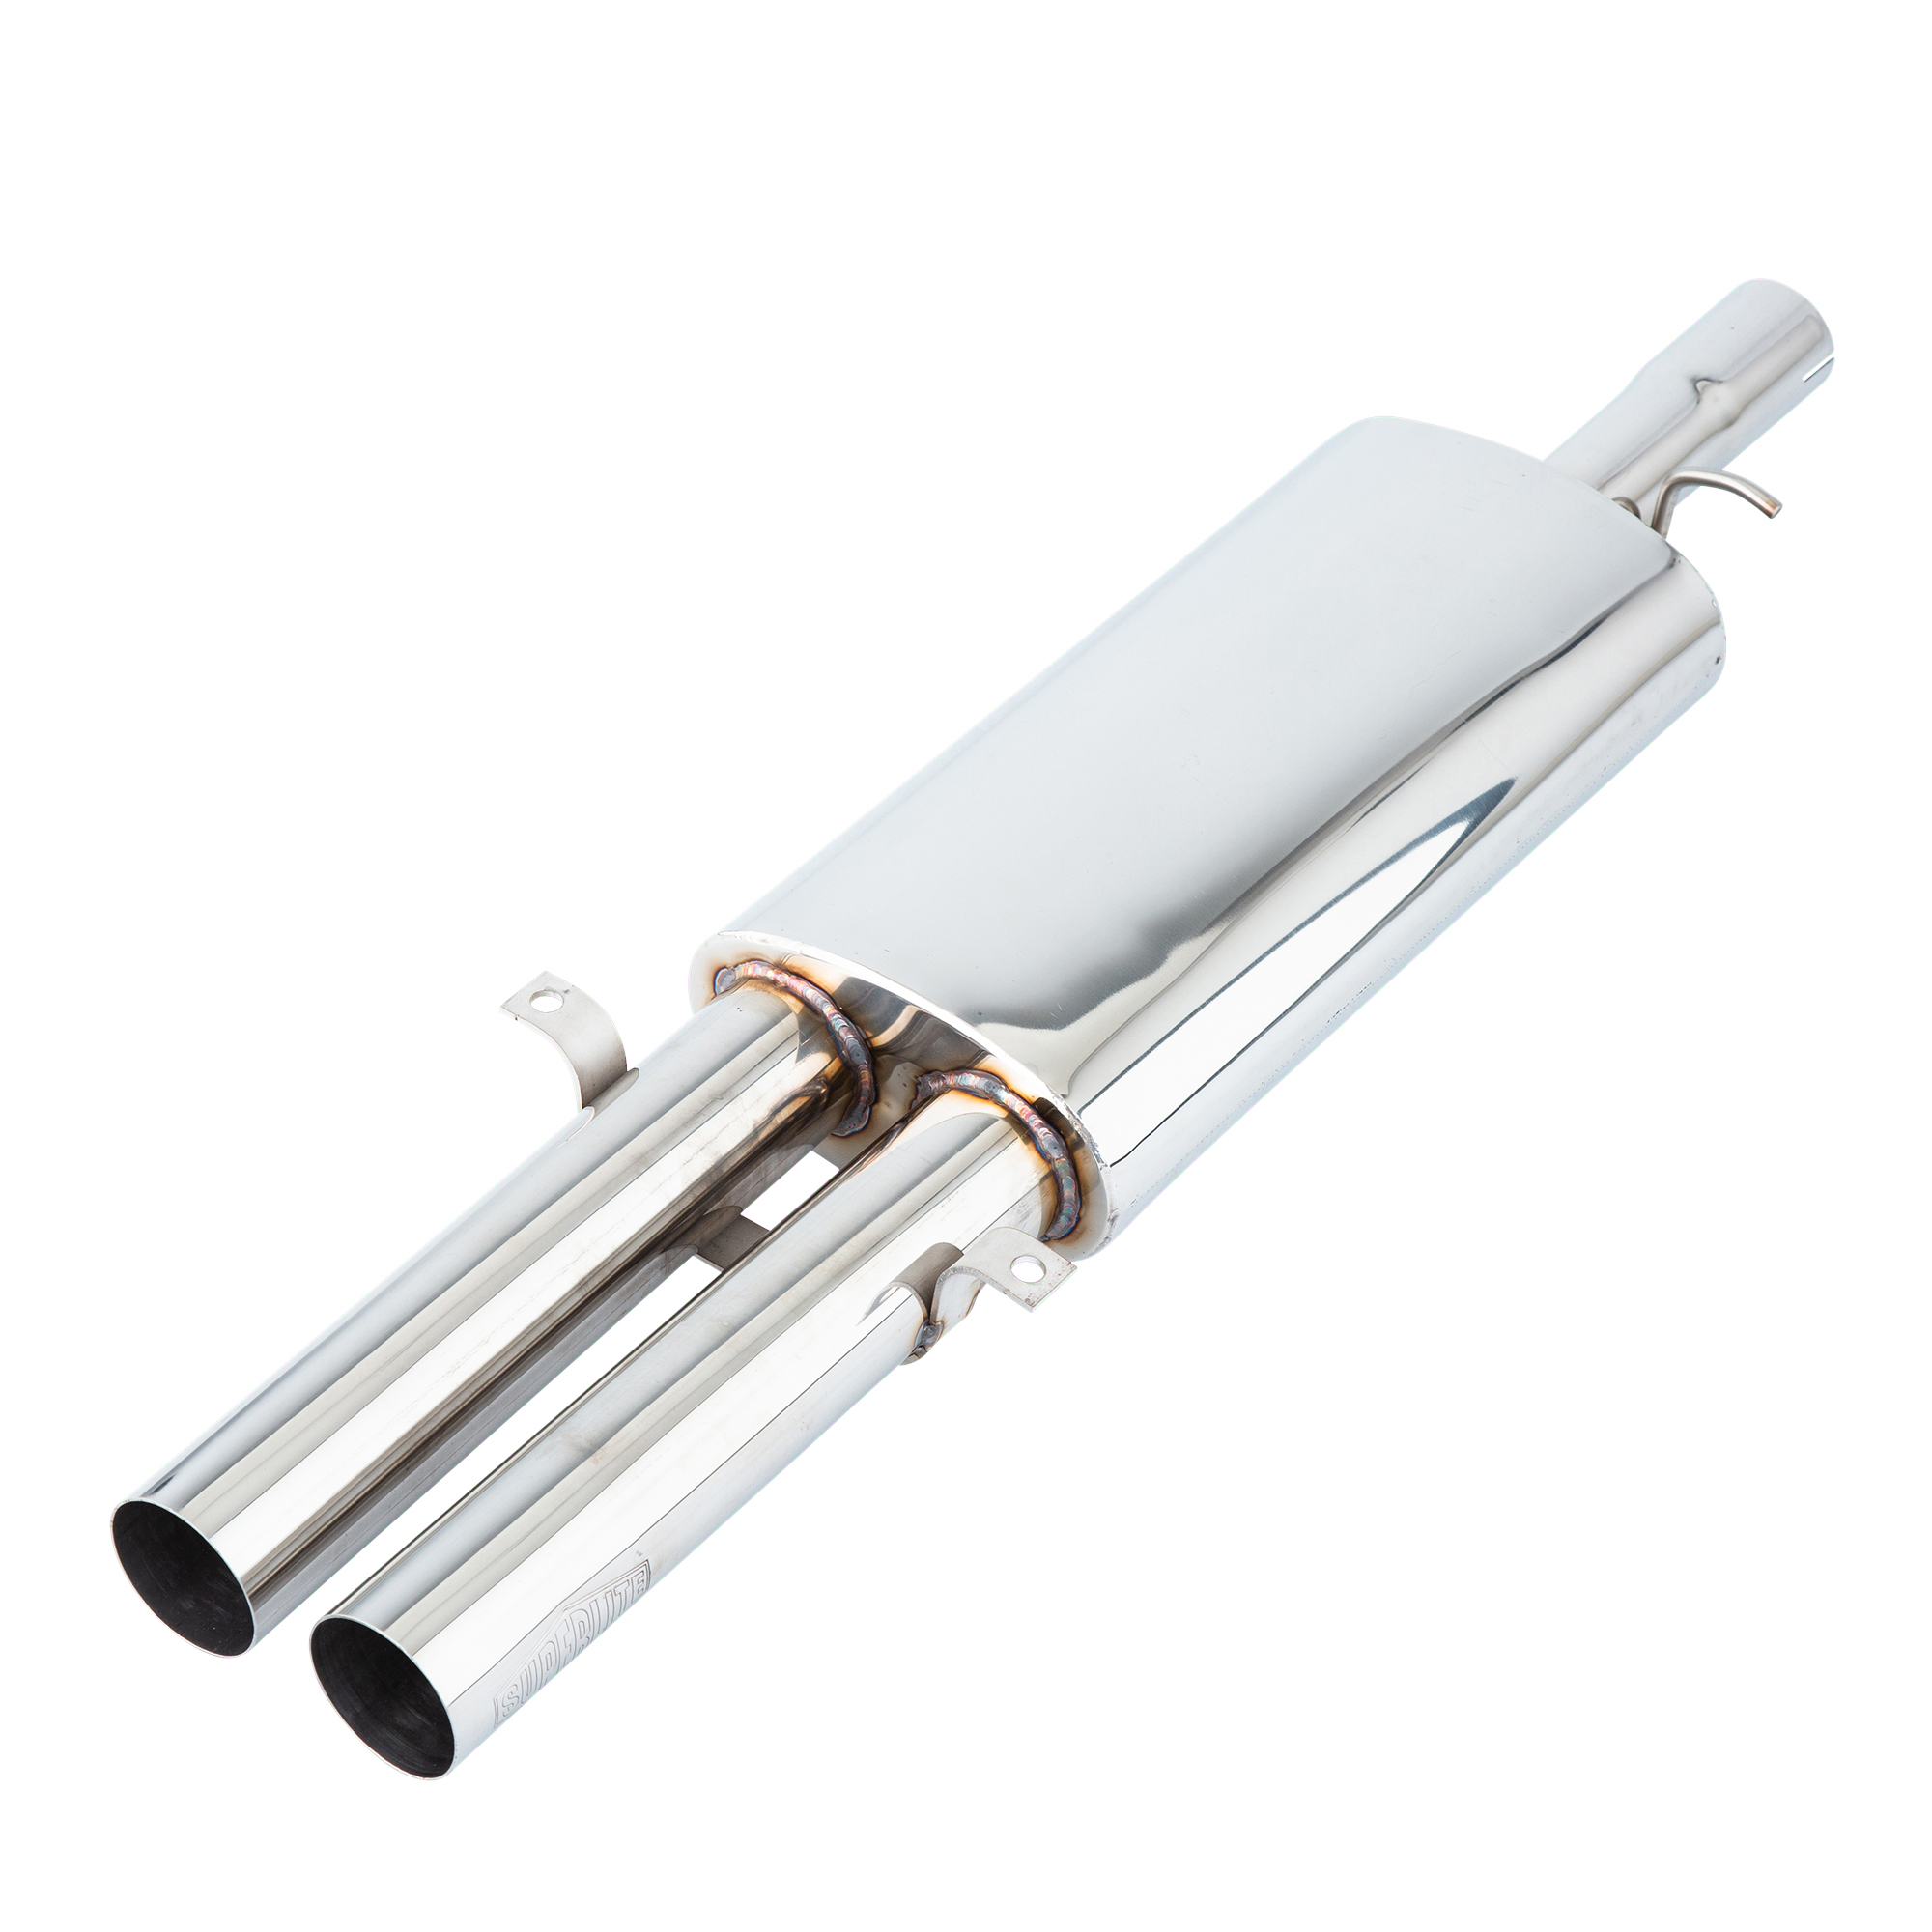 SUPERLITE® STAINLESS STEEL CENTRE EXIT 2.5" SIDE BY SIDE REAR MUFFLER